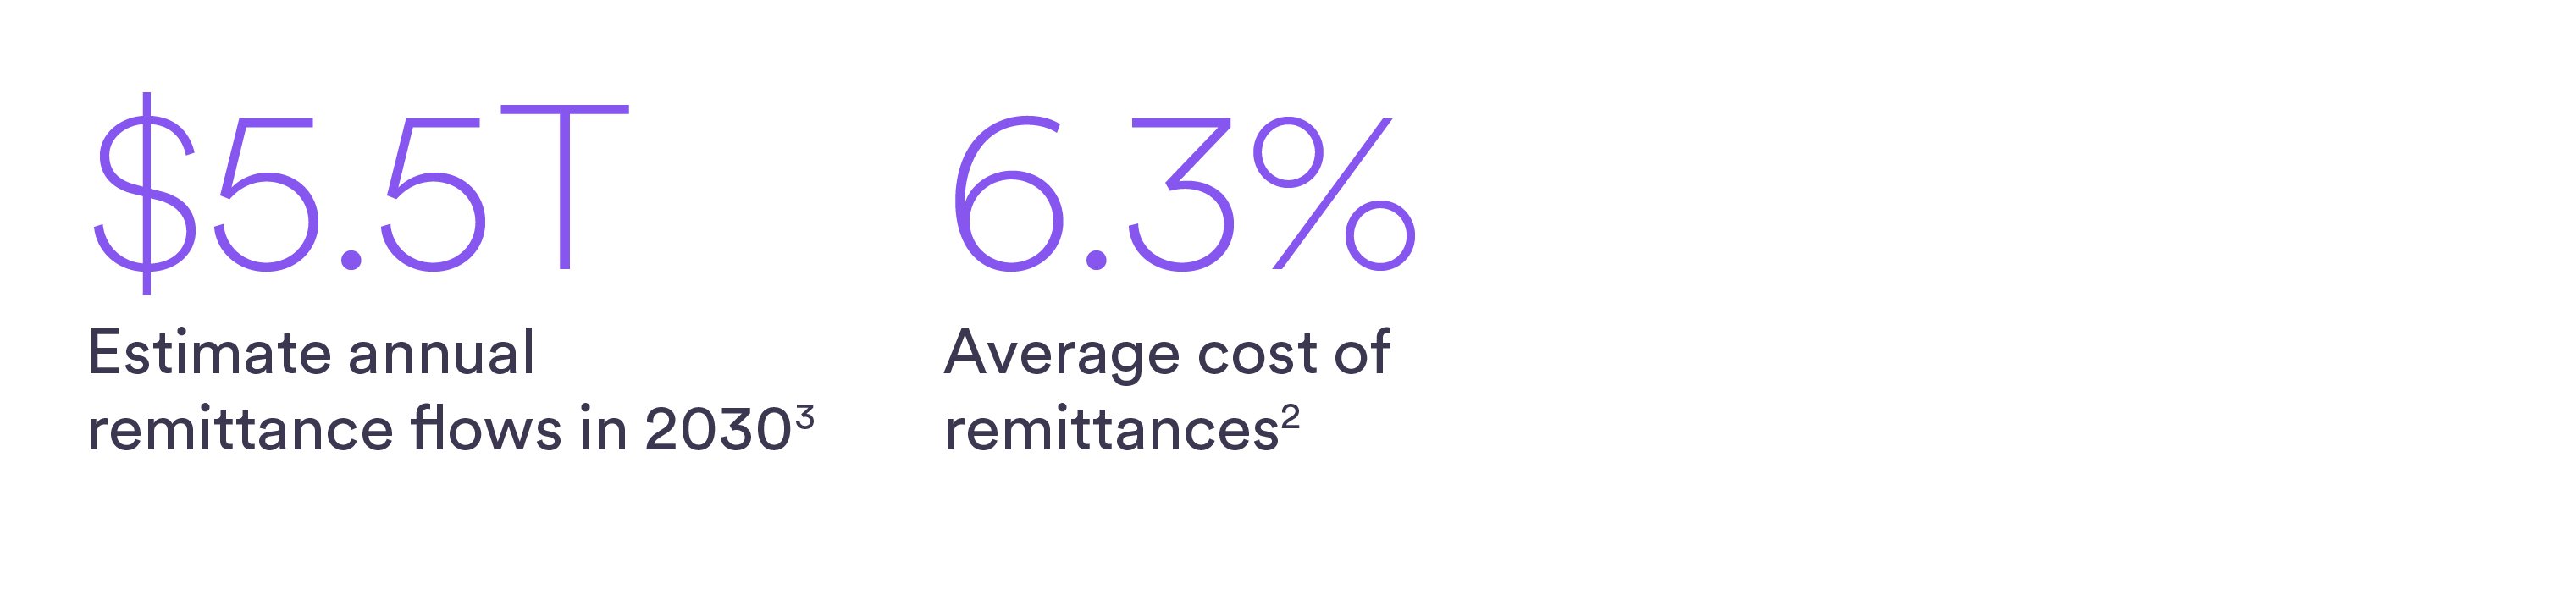 $5.5T: Estimated annual remittance flows in 2030; 6.3%: Average cost of remittances